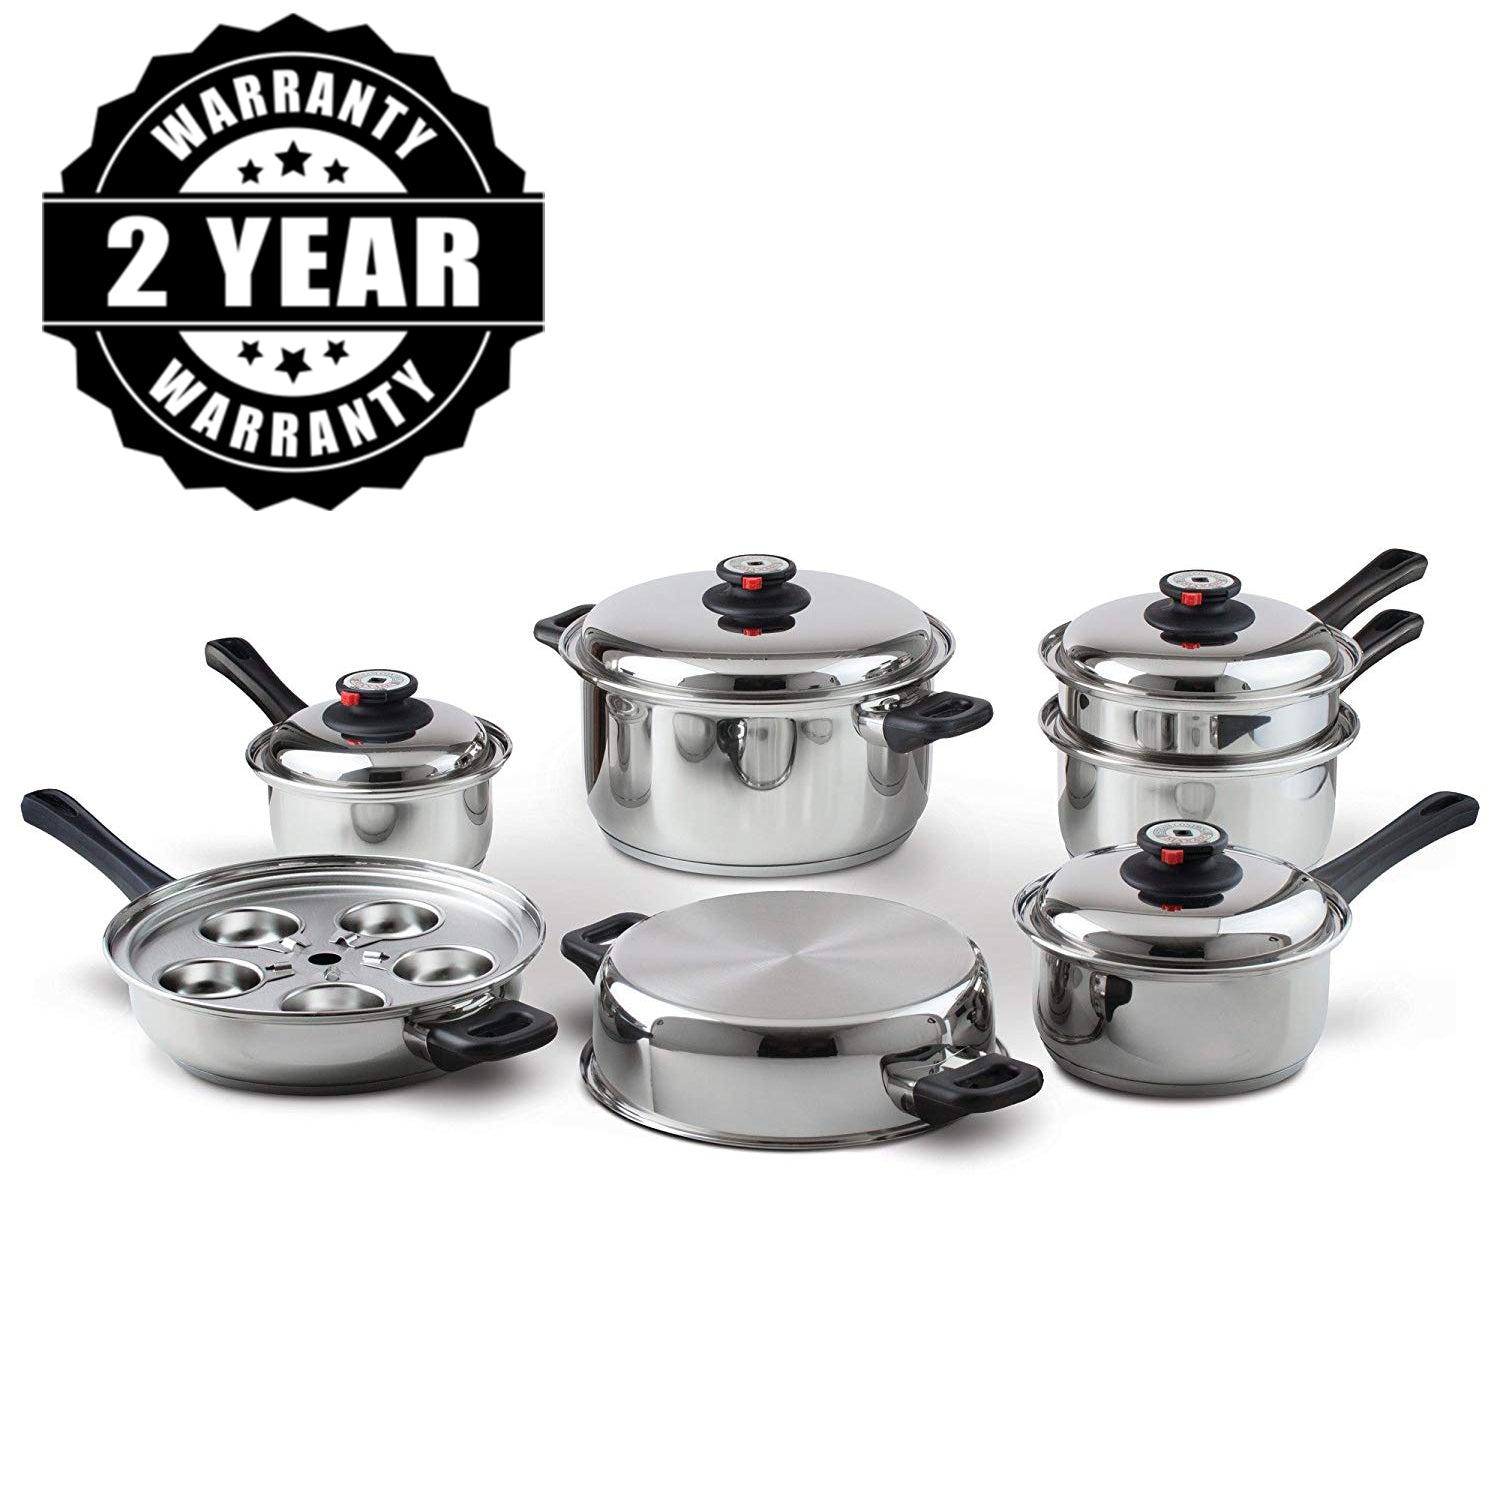 Royal Prestige Cookware Review: Is it Really Worth the Hype?